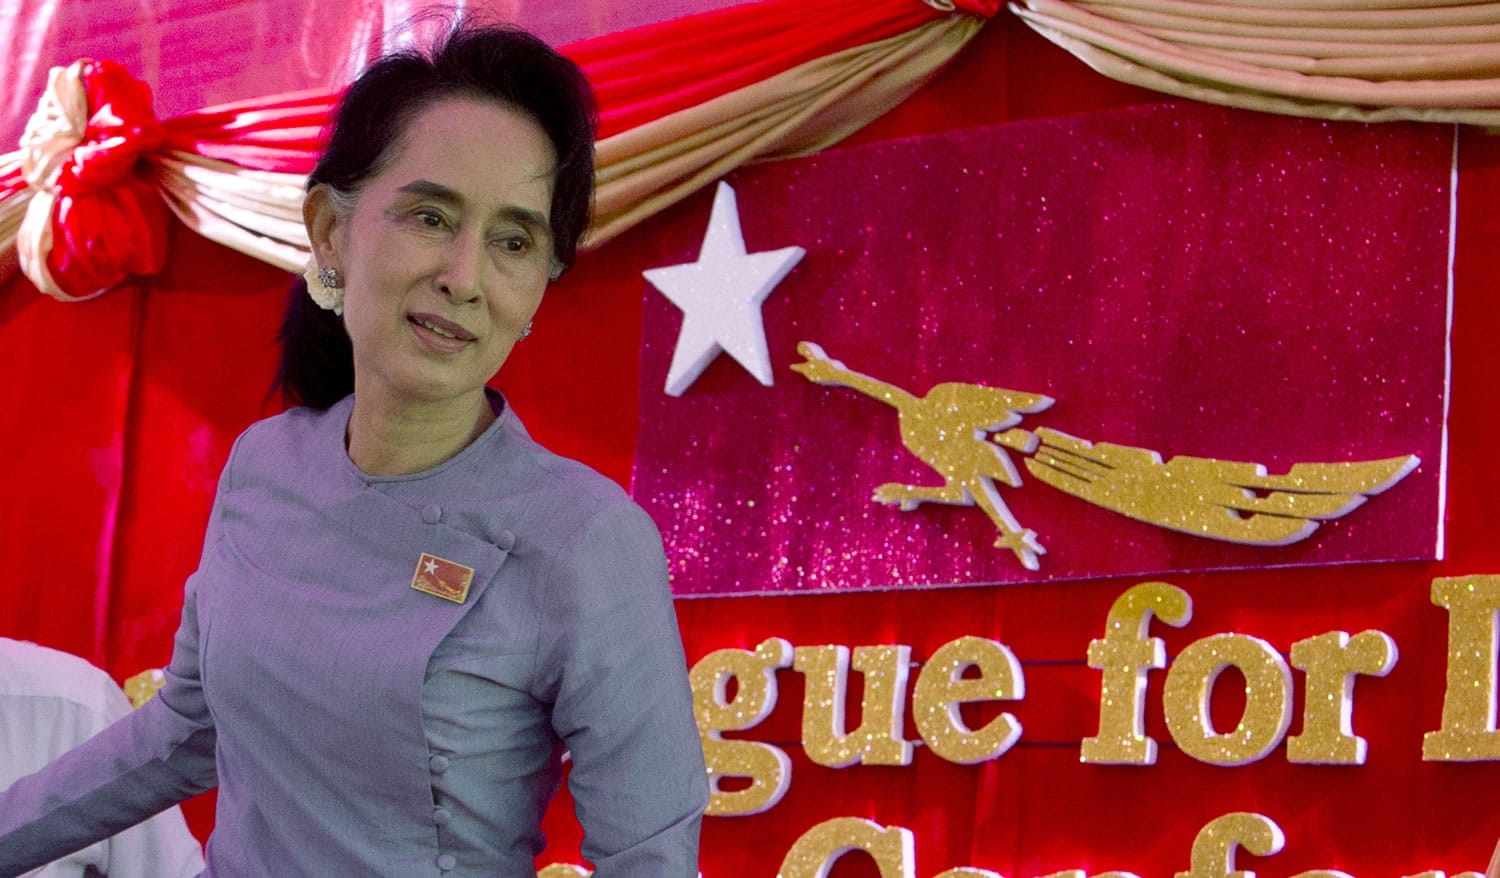 Opposition leader Aung San Suu Kyi leaves a press conference Thursday at her home in Yangon, Myanmar.